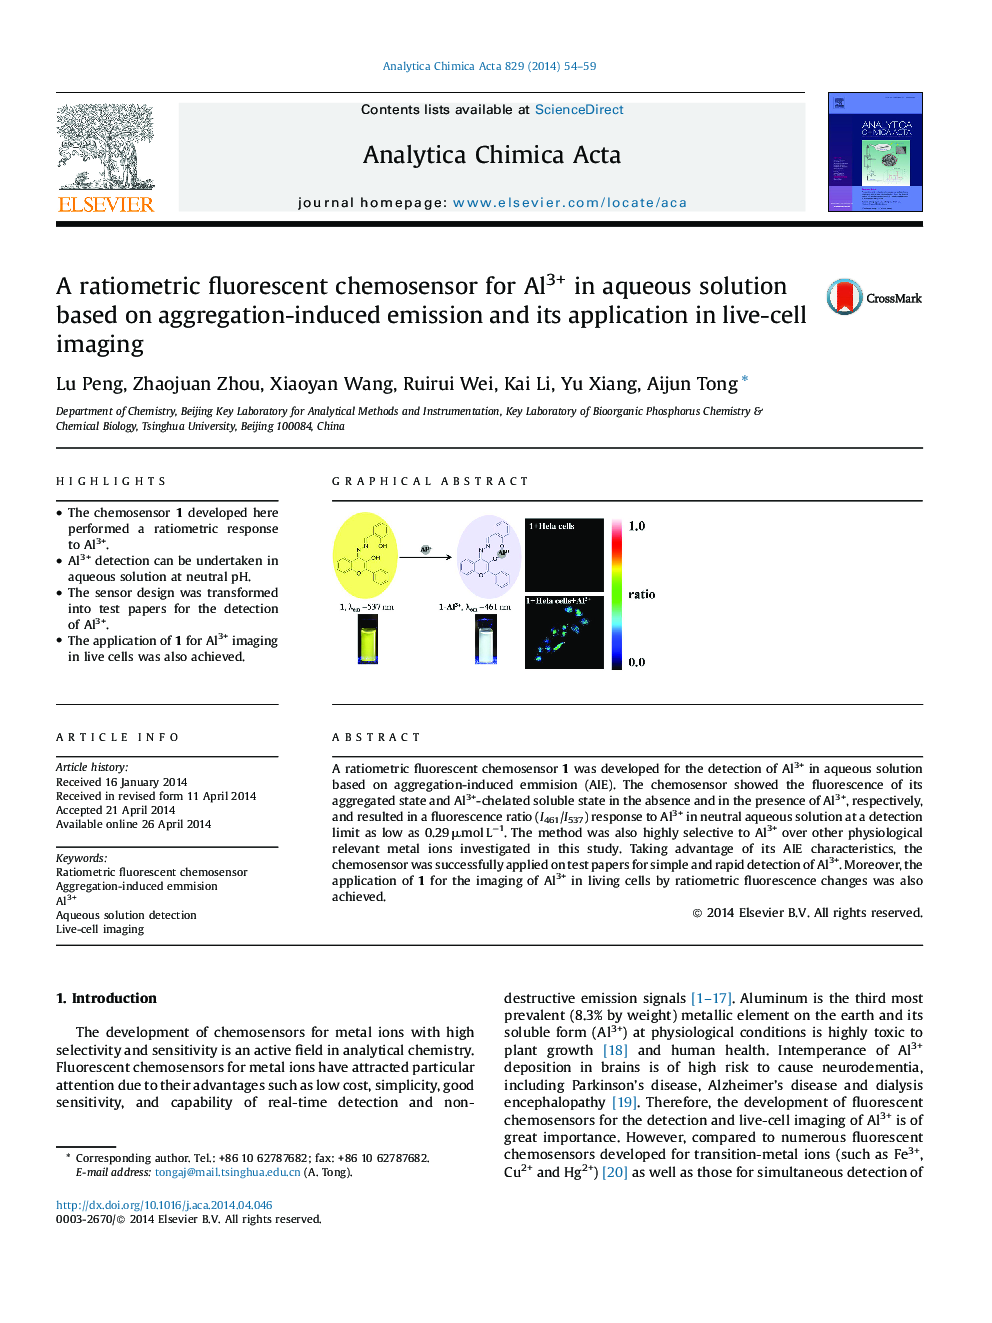 A ratiometric fluorescent chemosensor for Al3+ in aqueous solution based on aggregation-induced emission and its application in live-cell imaging